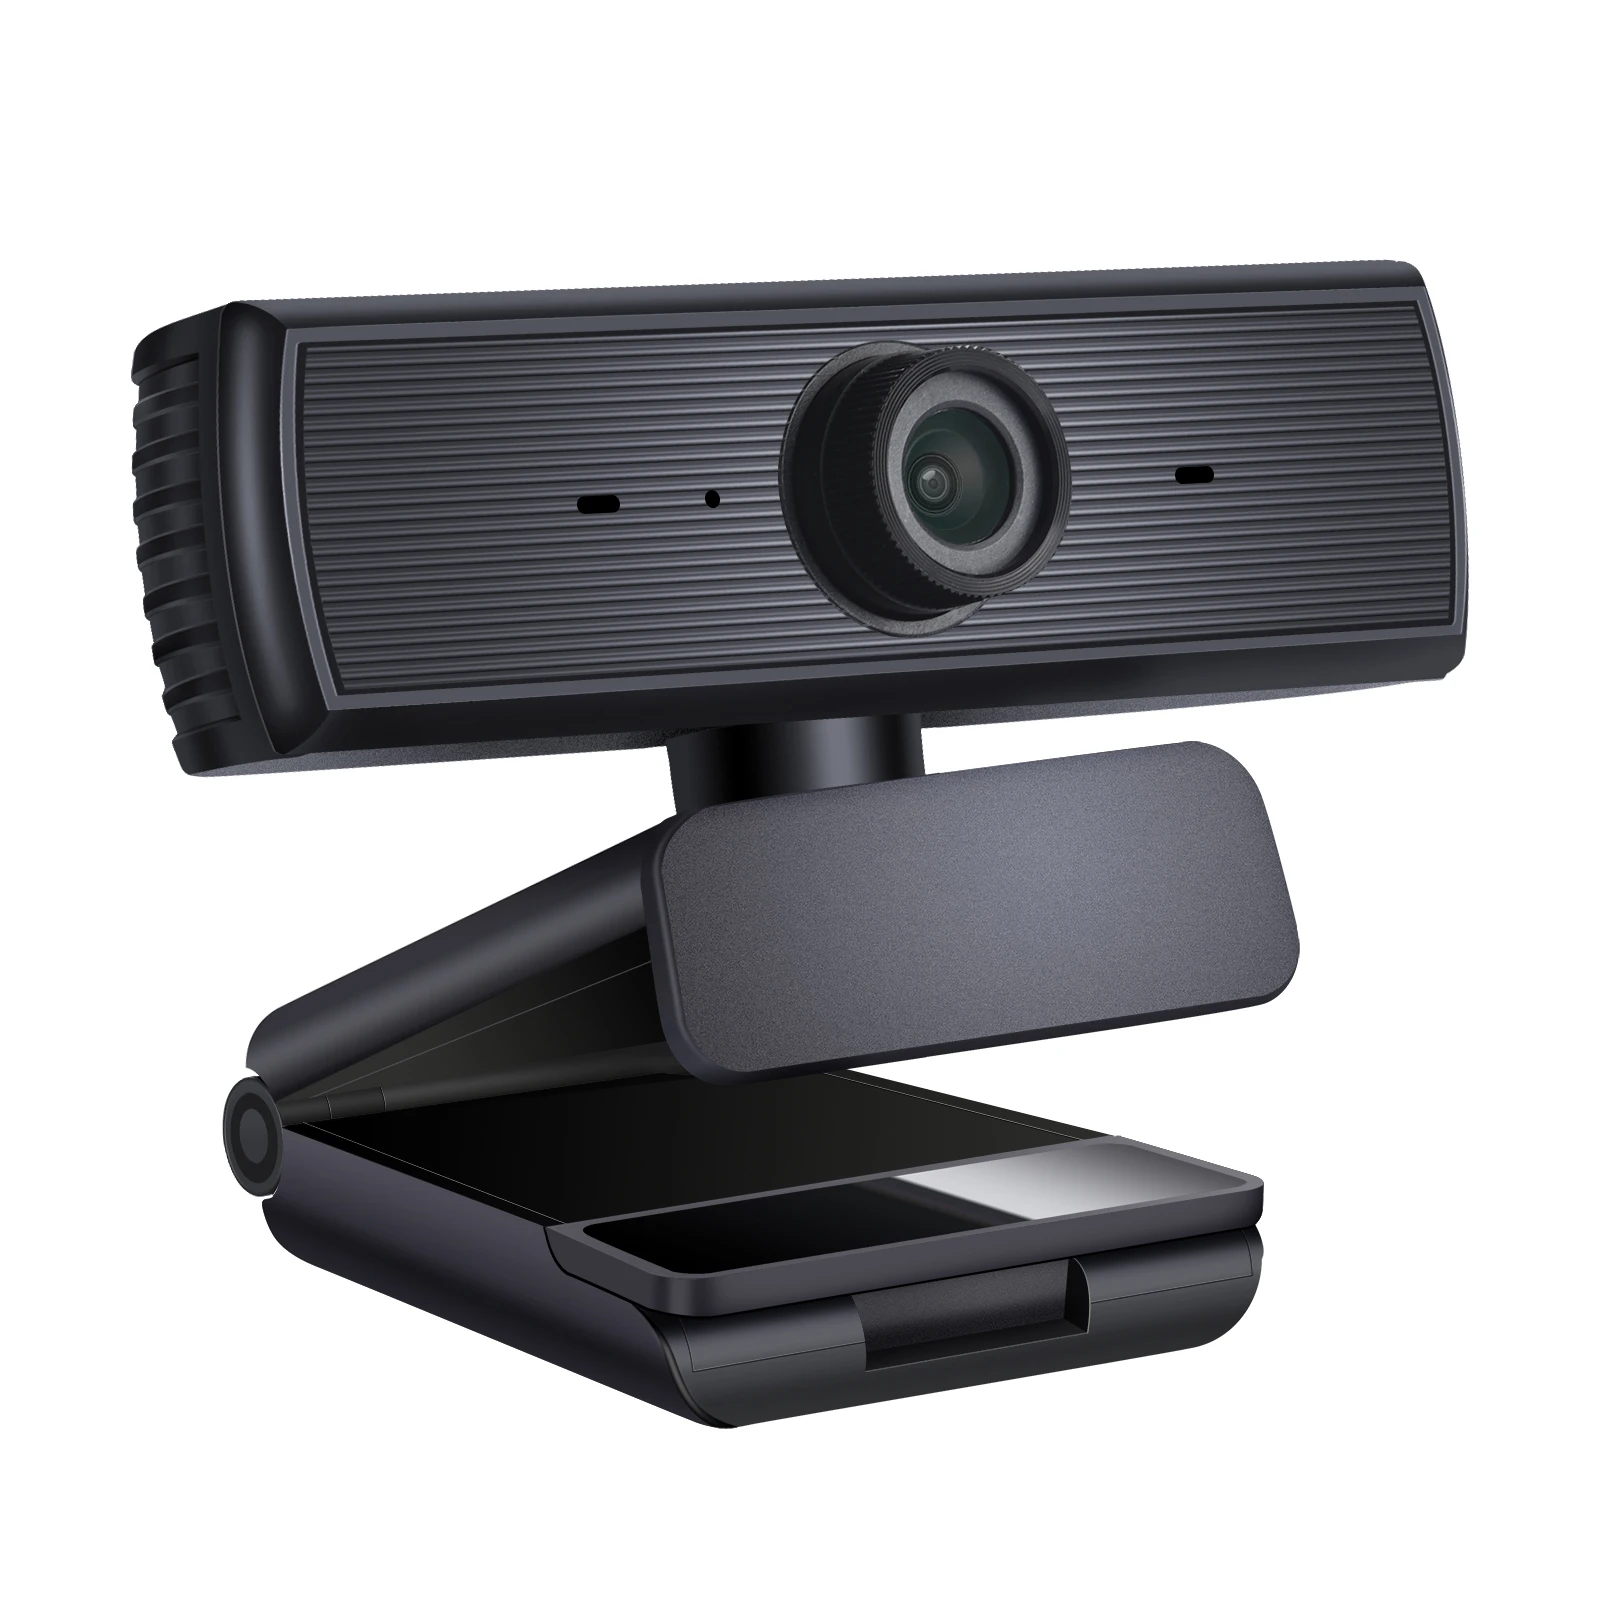 

Factory OEM 1080P Full HD Streaming Webcam for PC, MAC, Desktop & Laptop, Plug and Play USB Camera for YouTube, Skype